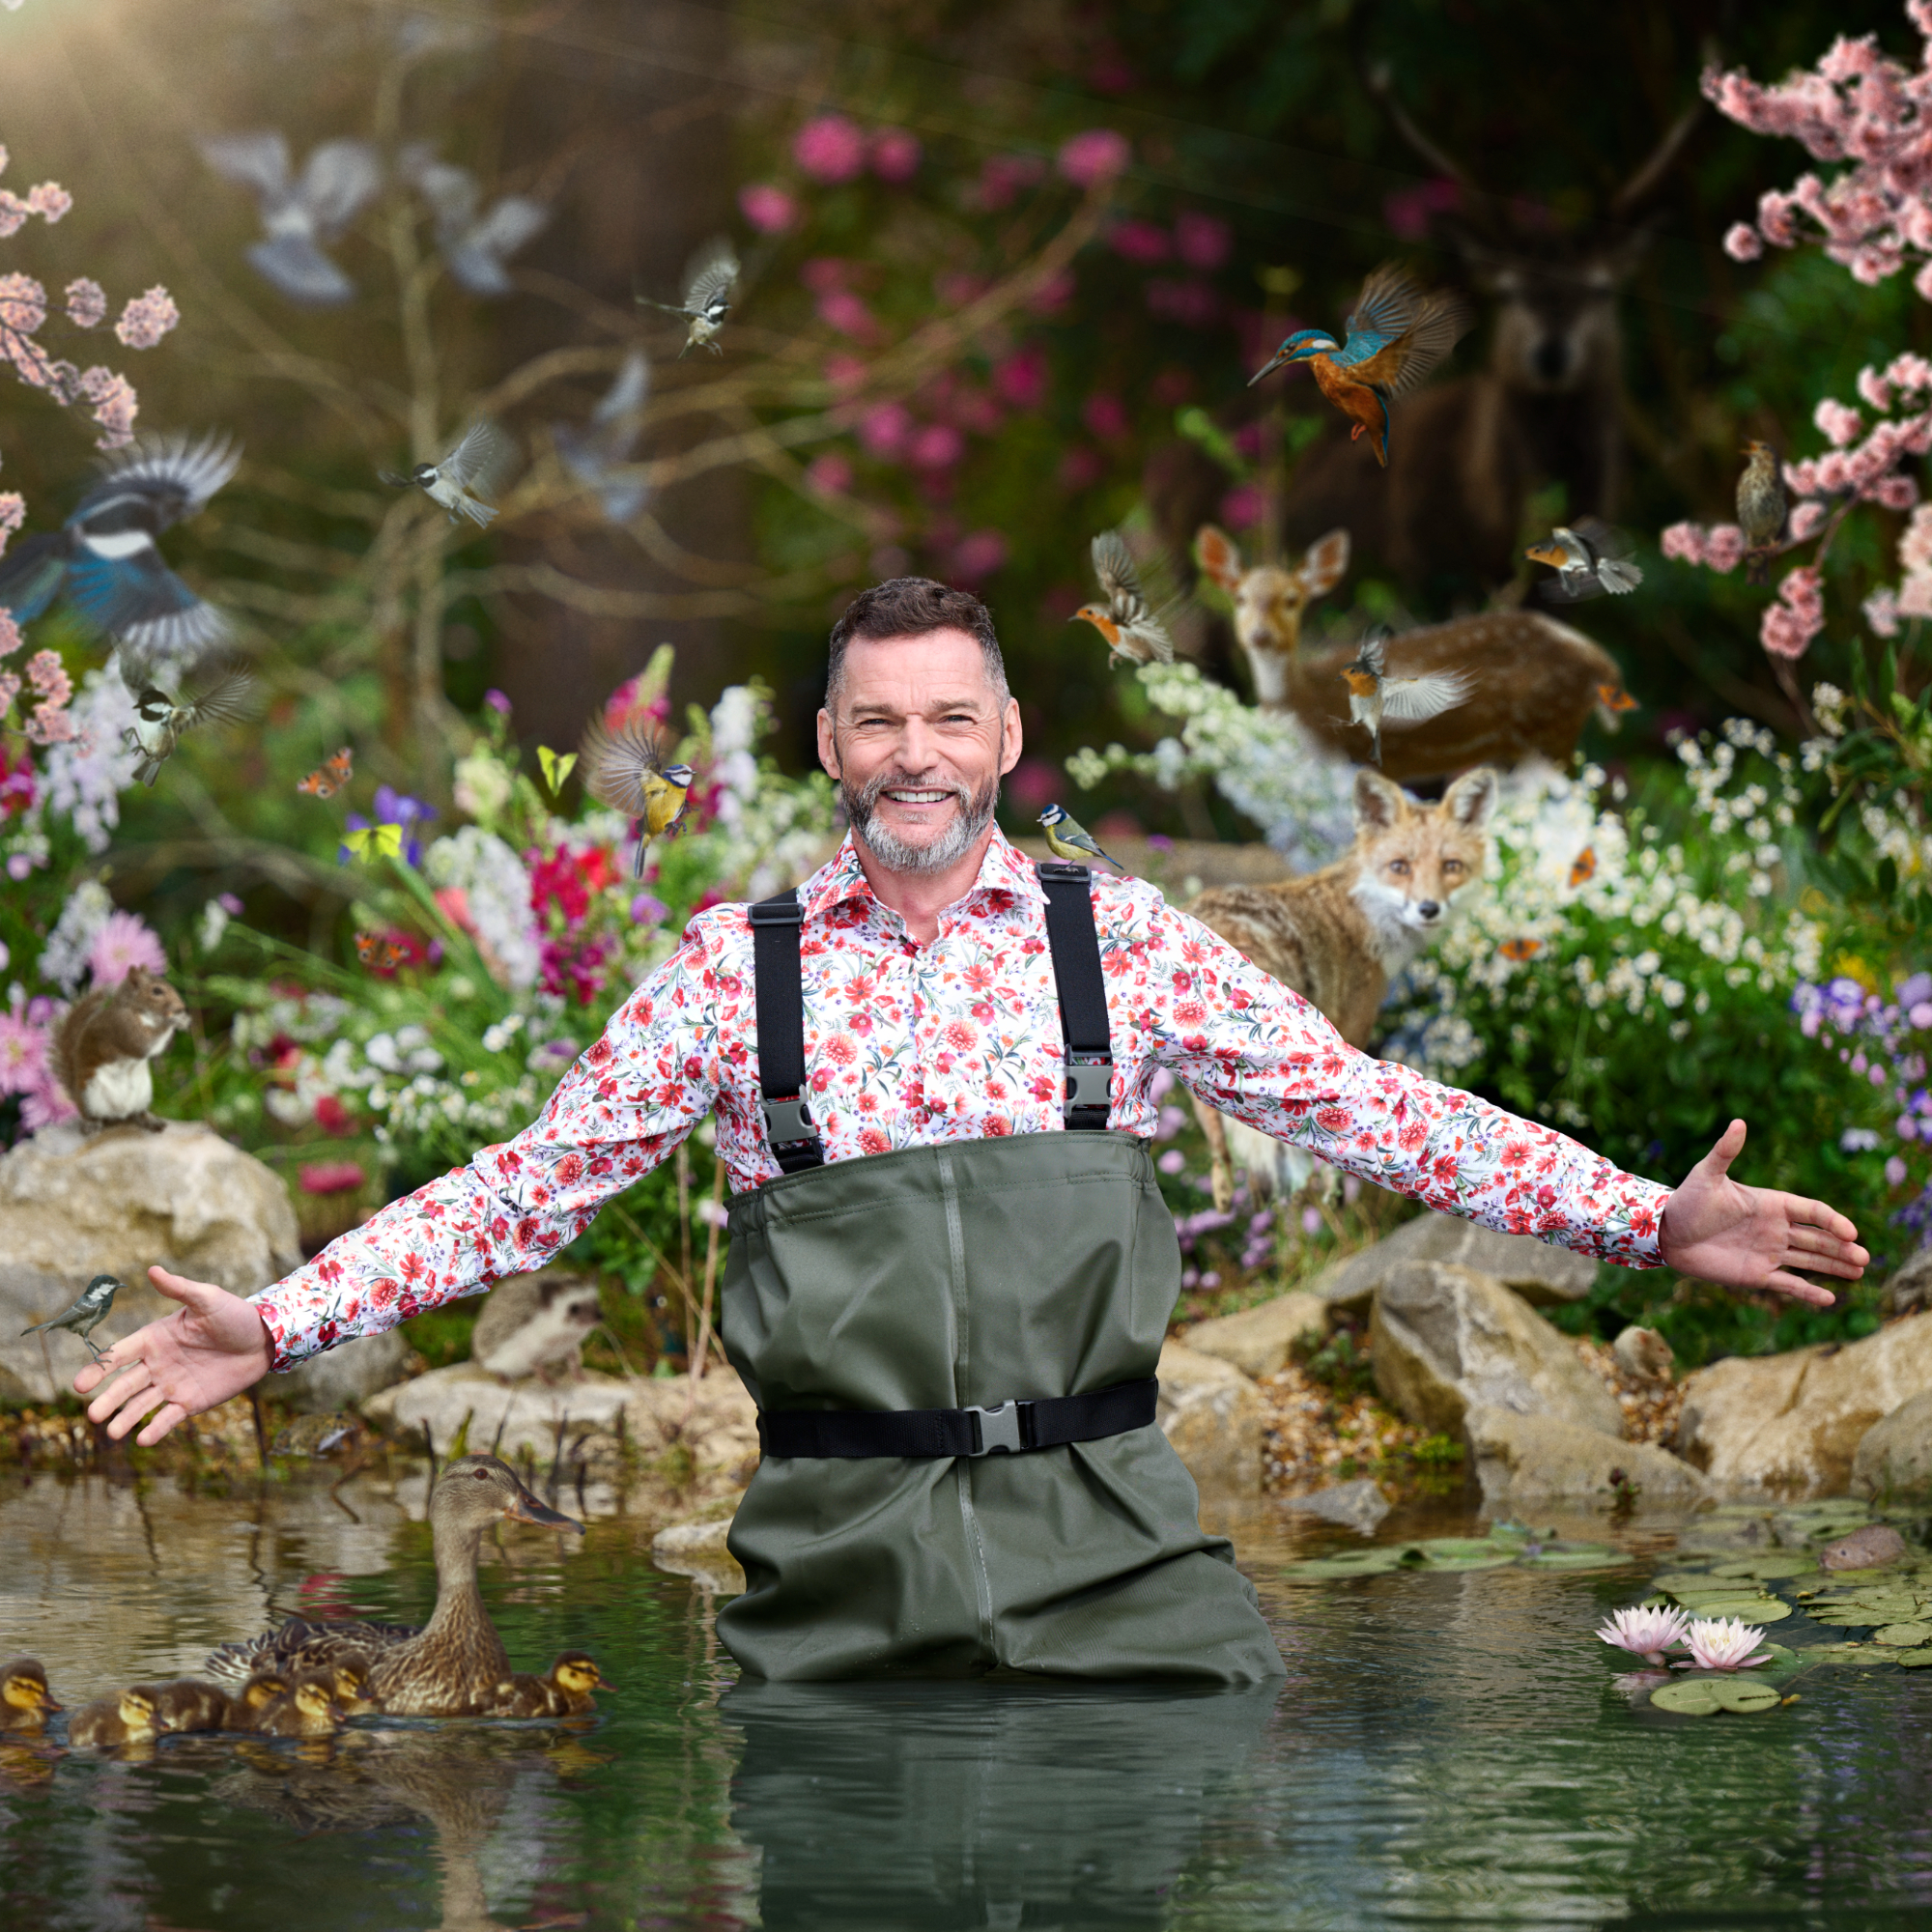 5 rules First Dates Fred Sirieix follows for hosting the perfect garden party